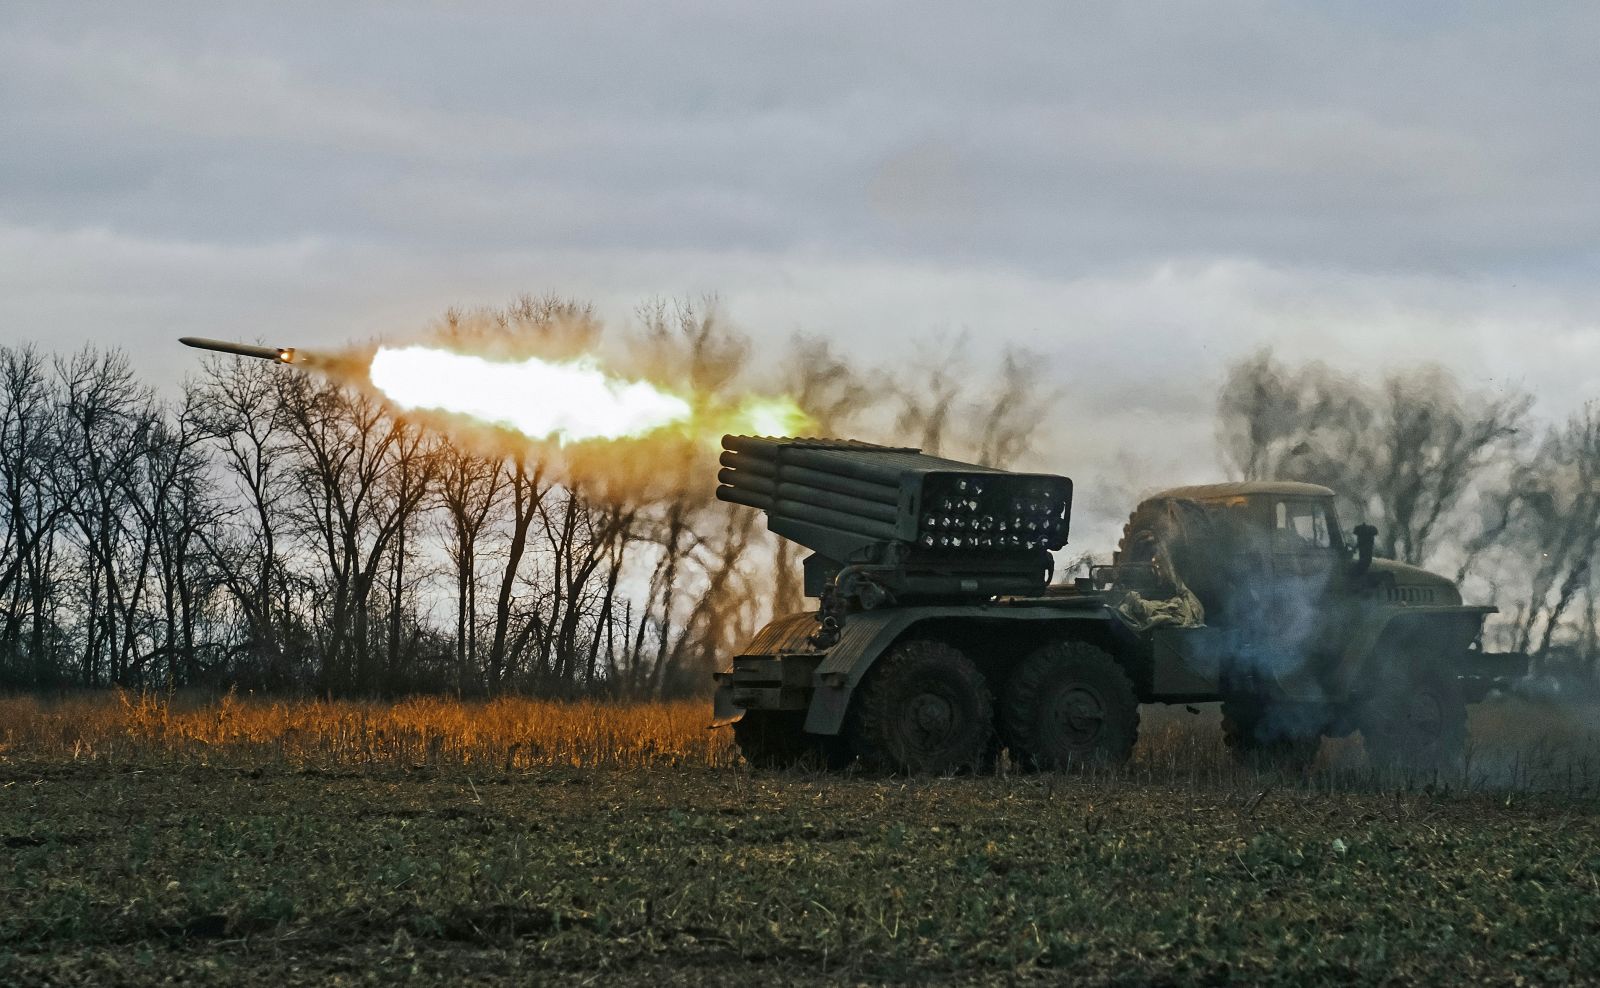 epa10390835 Ukrainian forces fire a multiple rocket launcher at a front line near Bakhmut, Donetsk area, Ukraine, 04 January 2023 (issued 05 January 2023). Heavy fighting is taking place in the region. Russian troops entered Ukraine on 24 February 2022 starting a conflict that has provoked destruction and a humanitarian crisis.  EPA/GEORGE IVANCHENKO